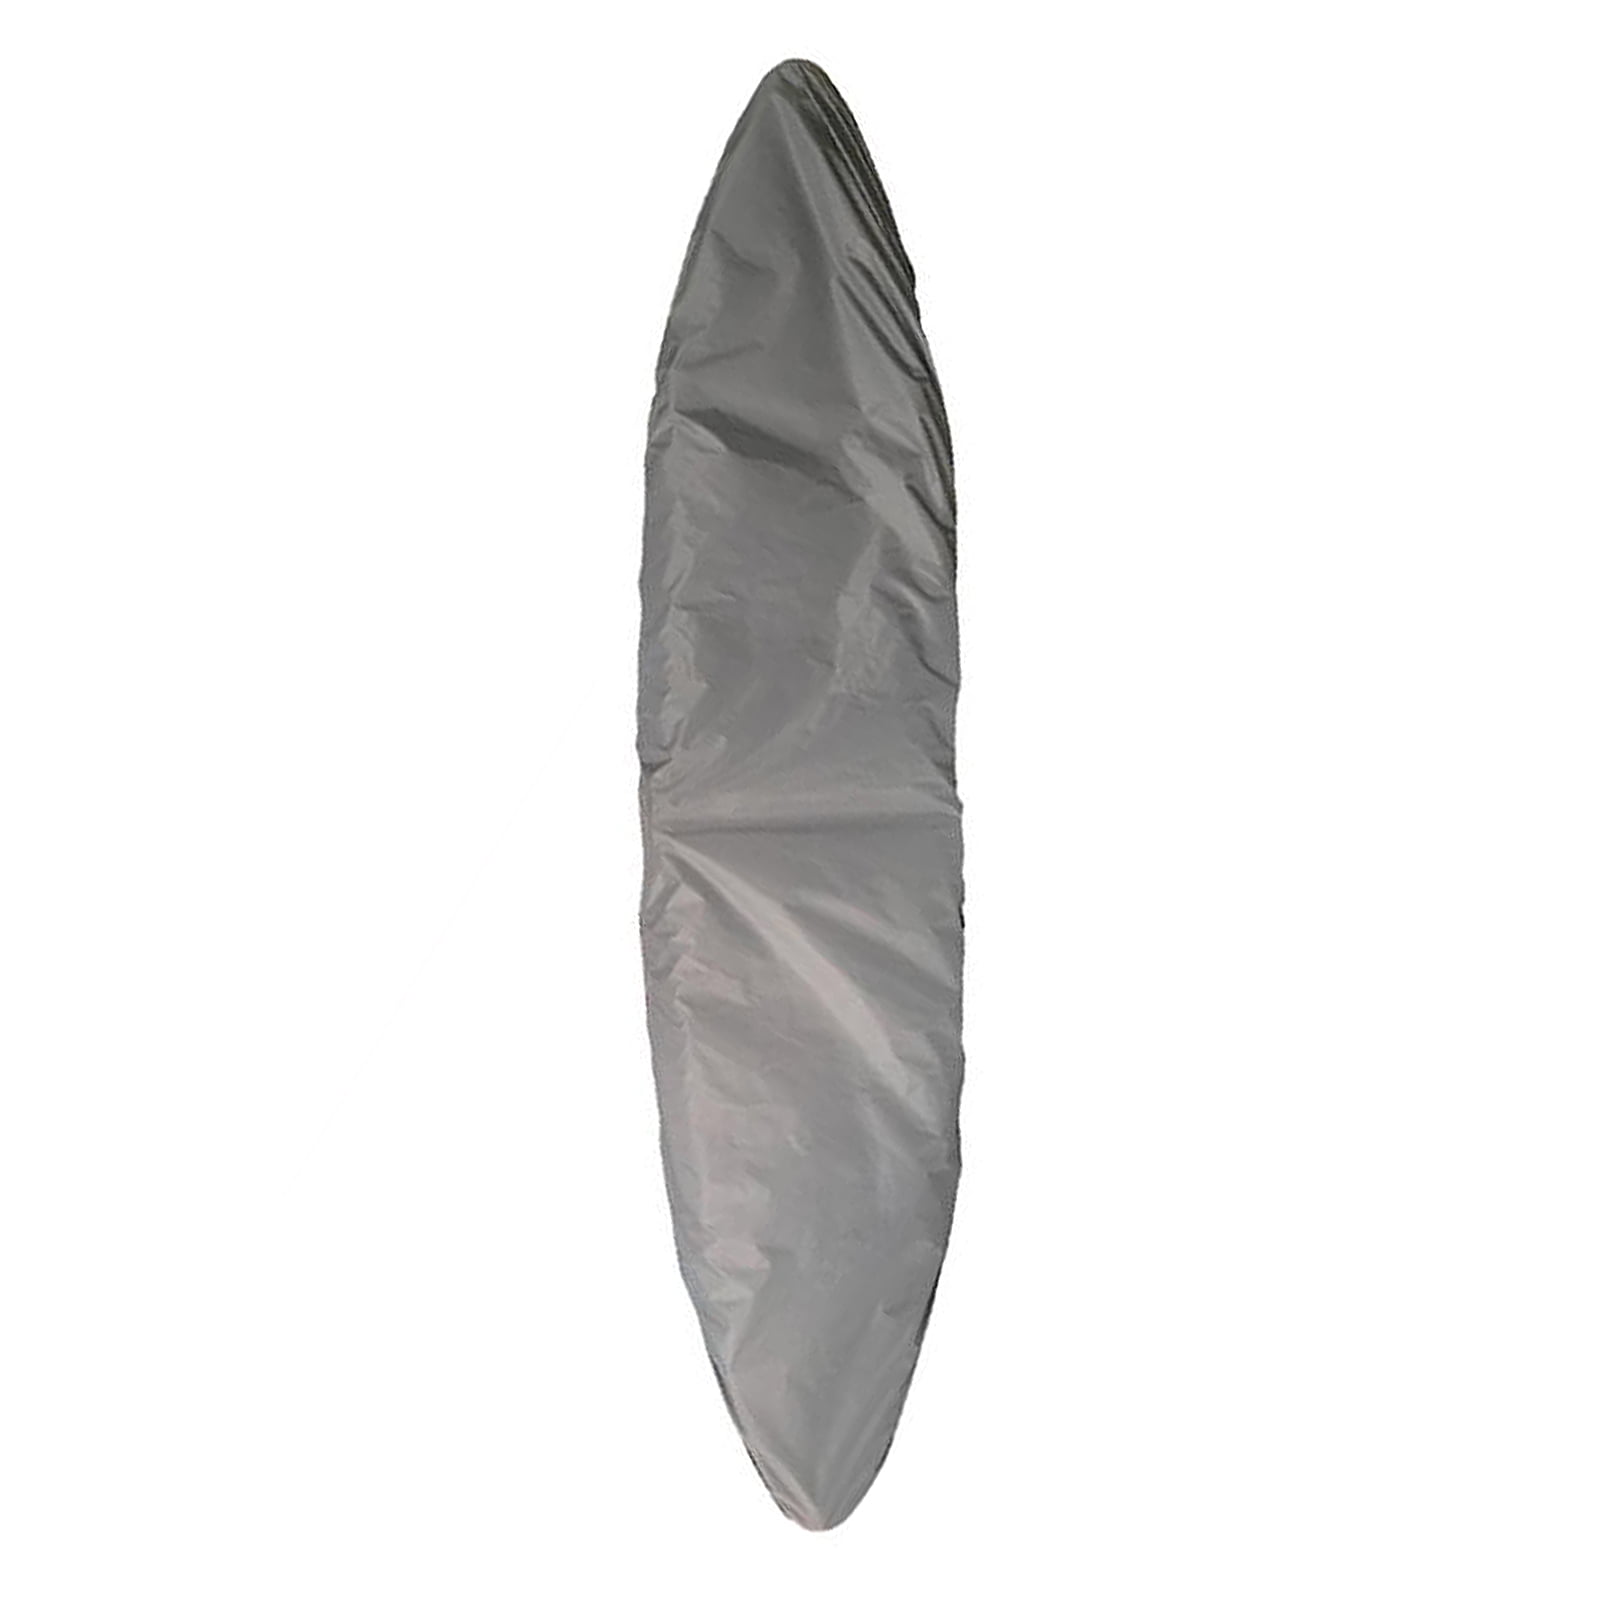 Details about   1pc Practical Anti-UV Waterproof Kayak Cover Fishing Boat Cover 